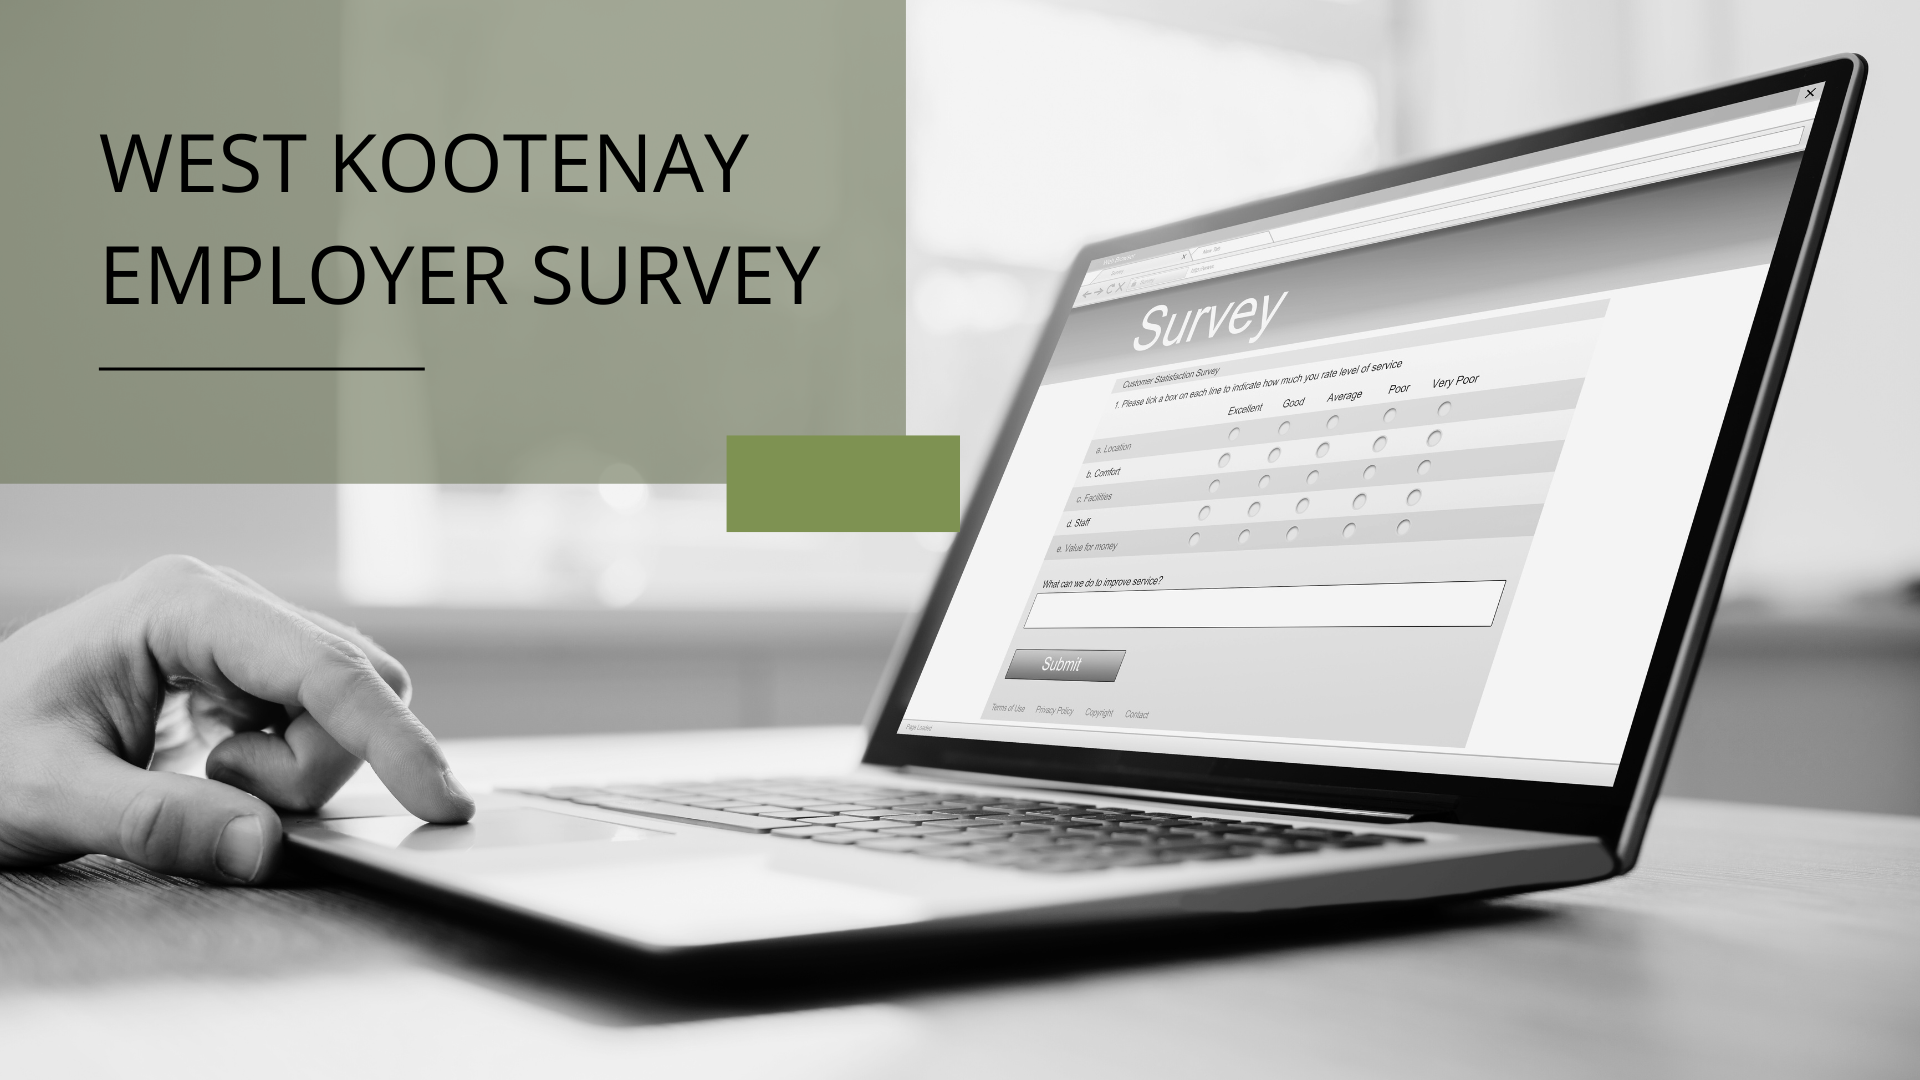 Your Input Matters: Employer Survey on Workforce Needs